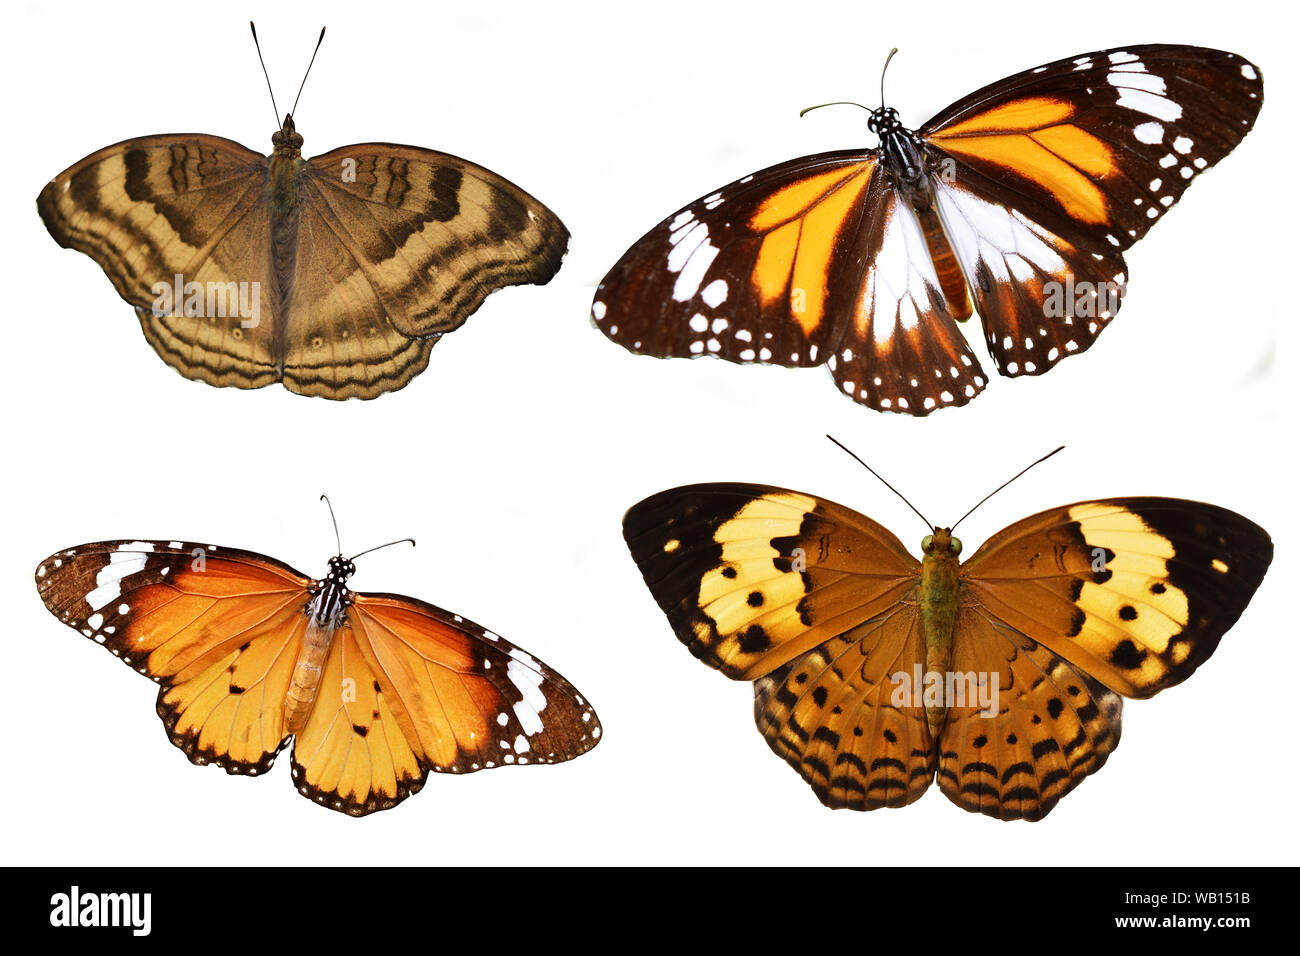 Black Veined Tiger, The rustic,Brown ,The Chocolate Pansy , Plain tiger,African monarch, Set of colorful butterflies isolated on white background Stock Photo